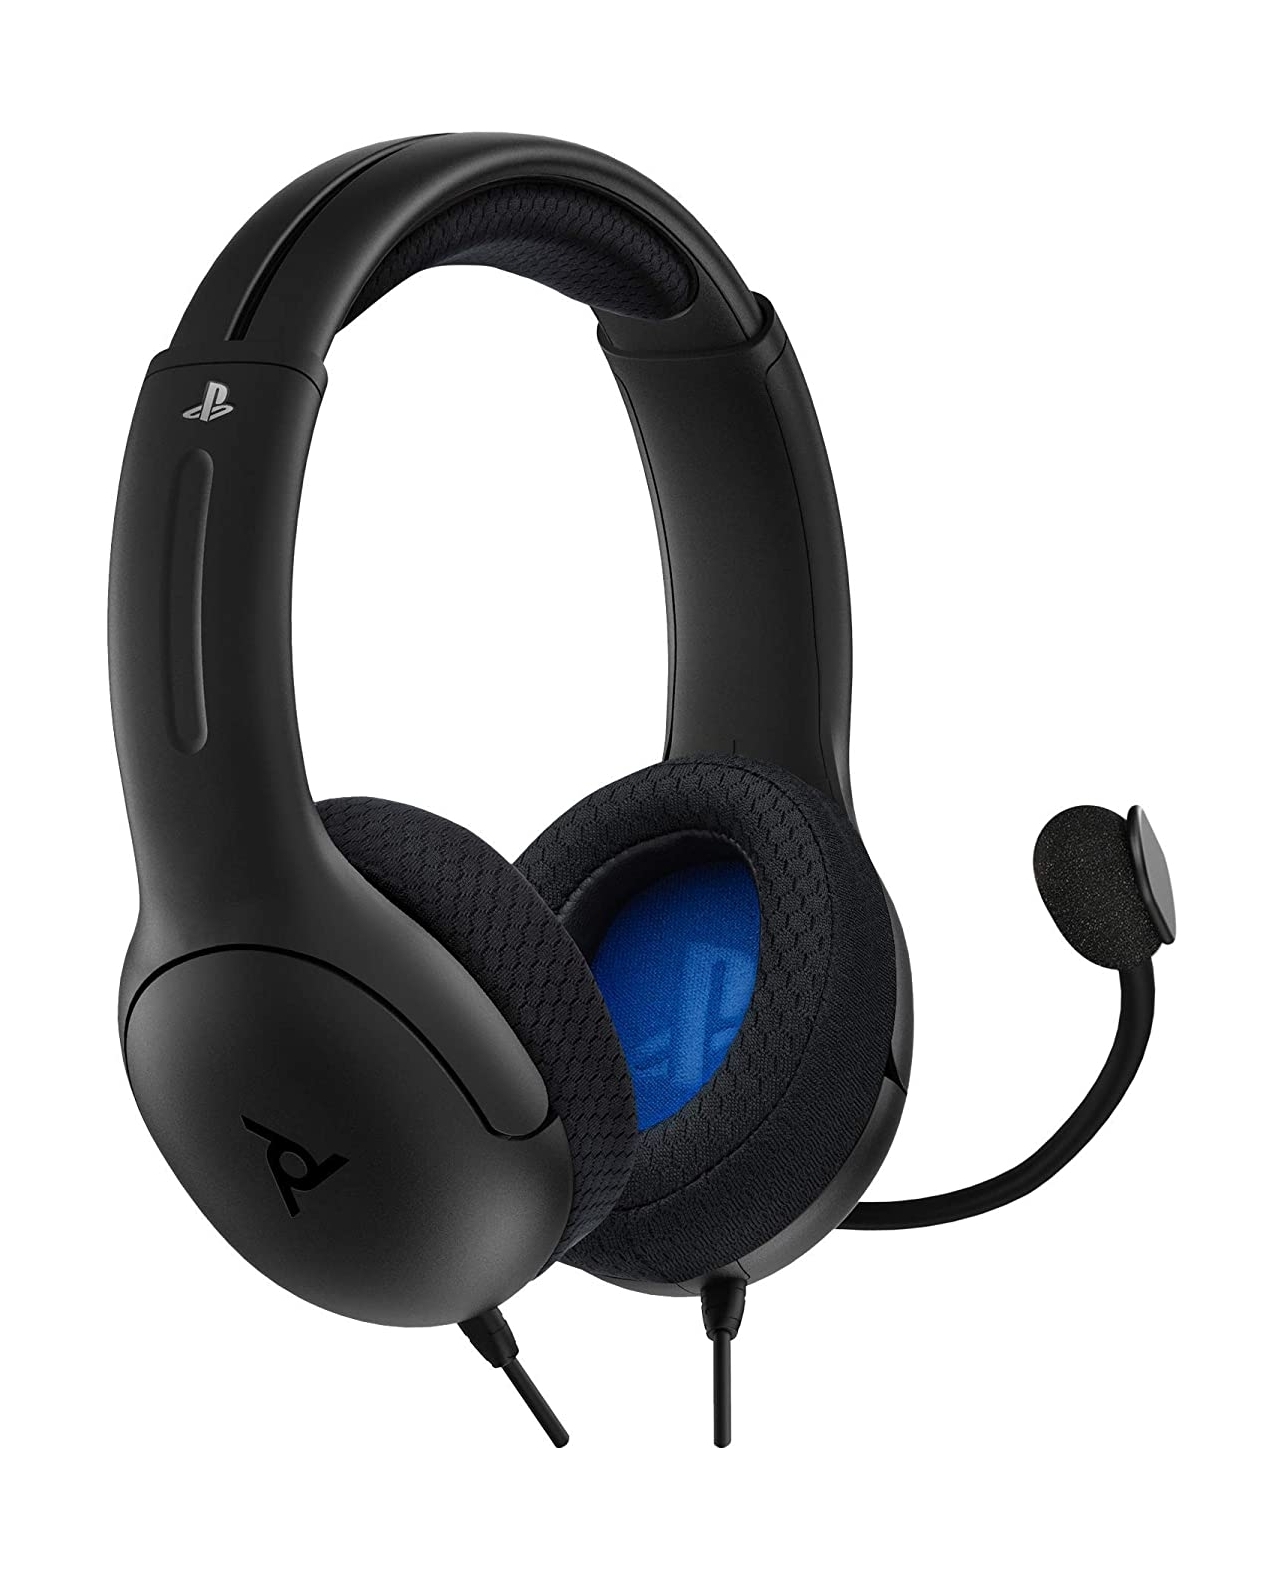 Buy Pdp lvl40 ps4 wired stereo headset gaming - grey in Saudi Arabia